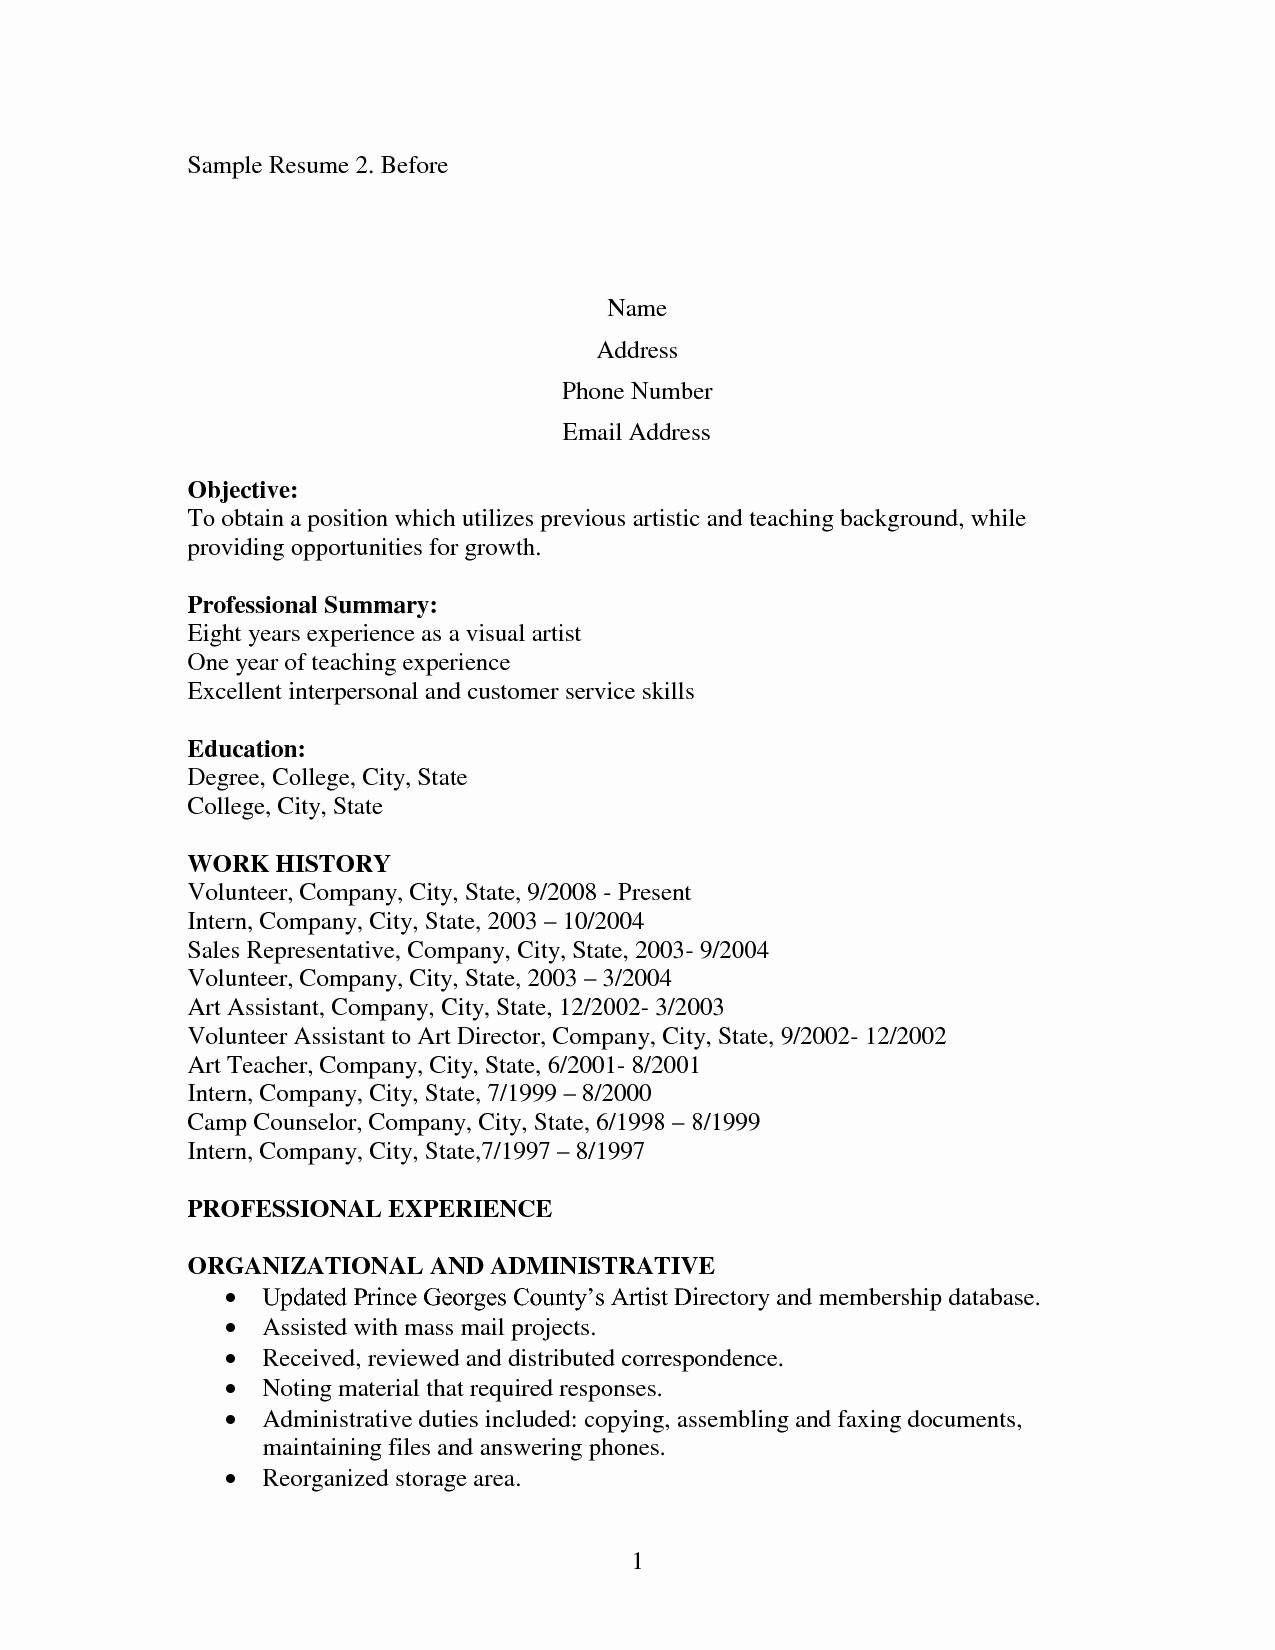 Resume for Stay at Home Mom Returning to Work Template Sample Resume for Housewife Returning to Work Sample Resume for …